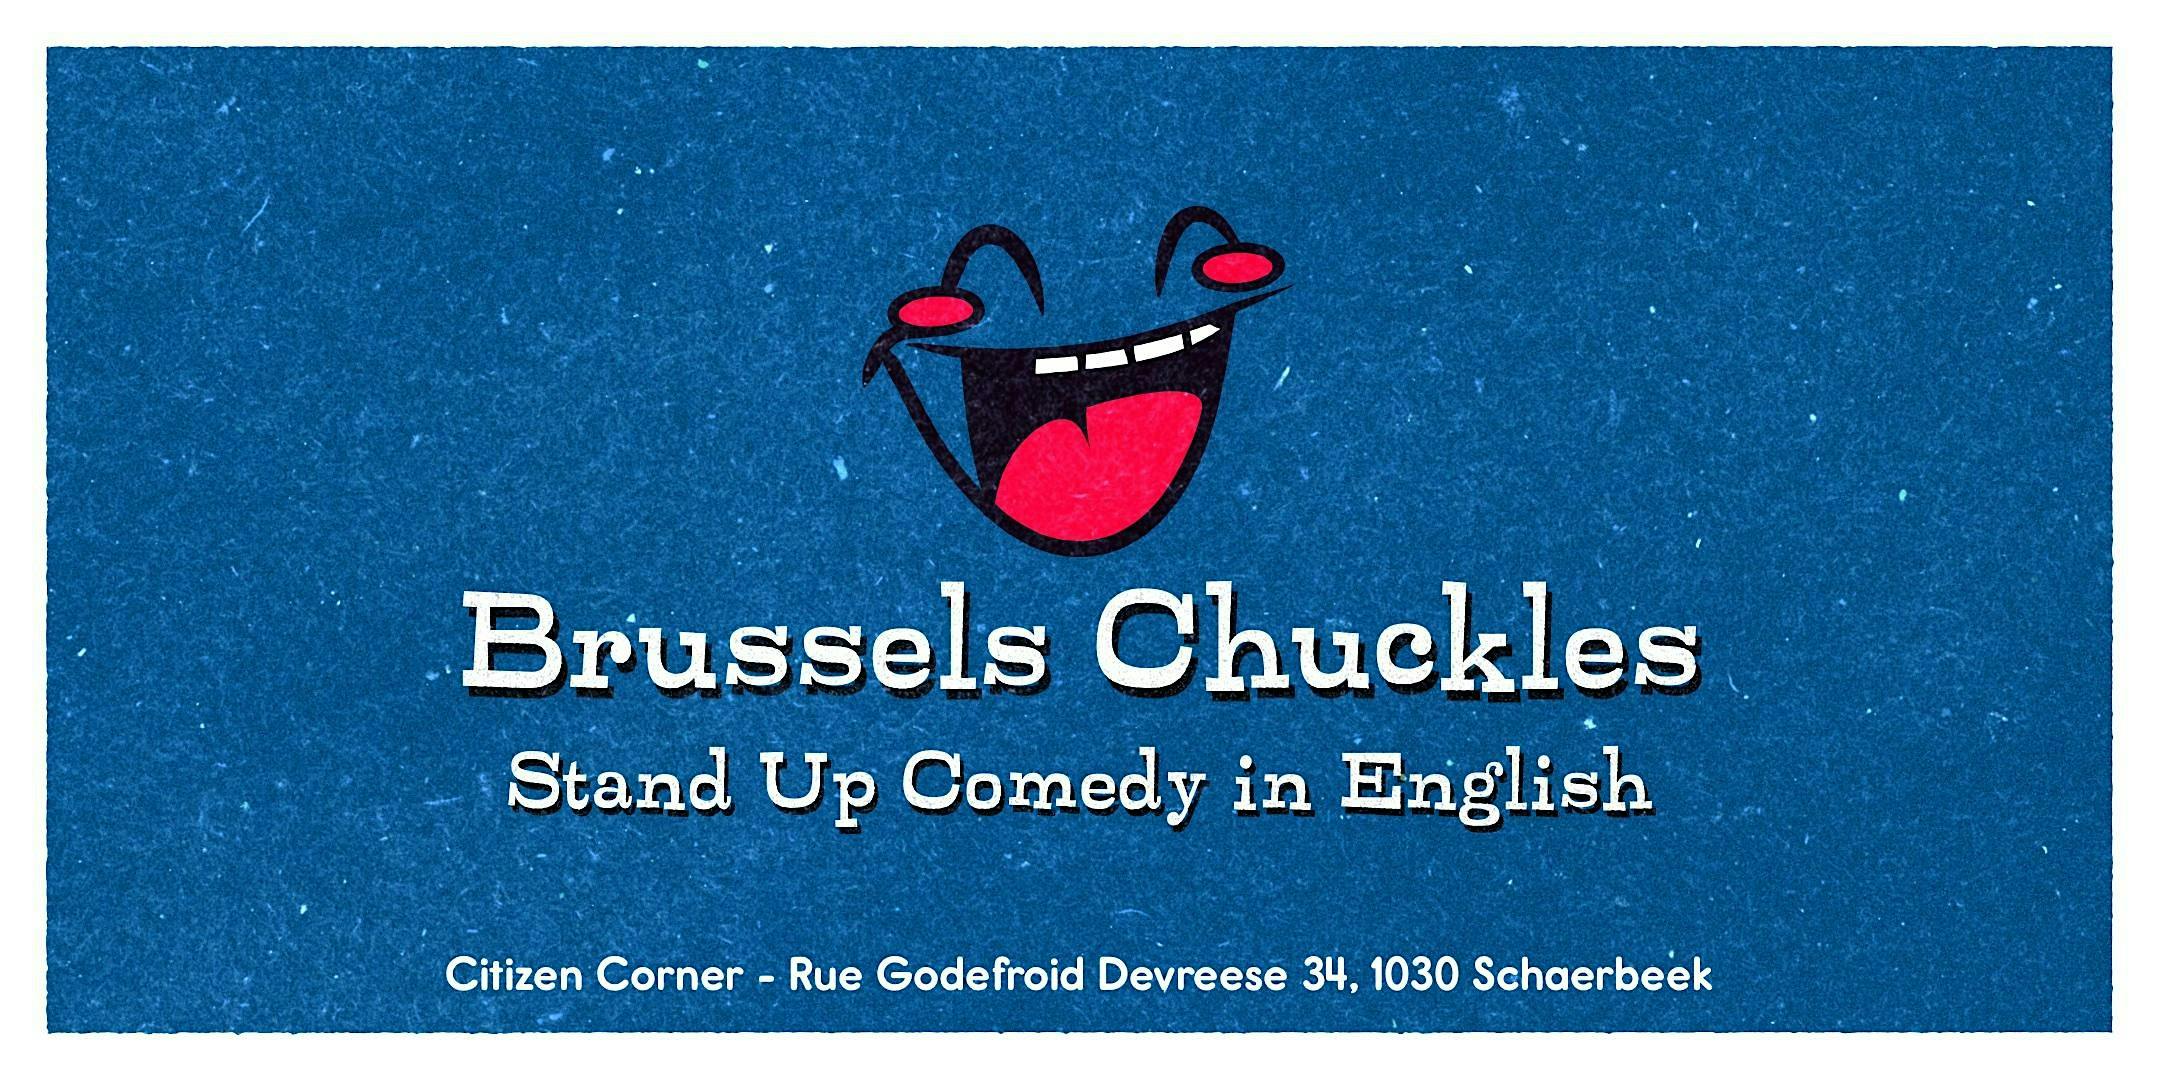 English Stand Up Comedy - Brussels Chuckles logo